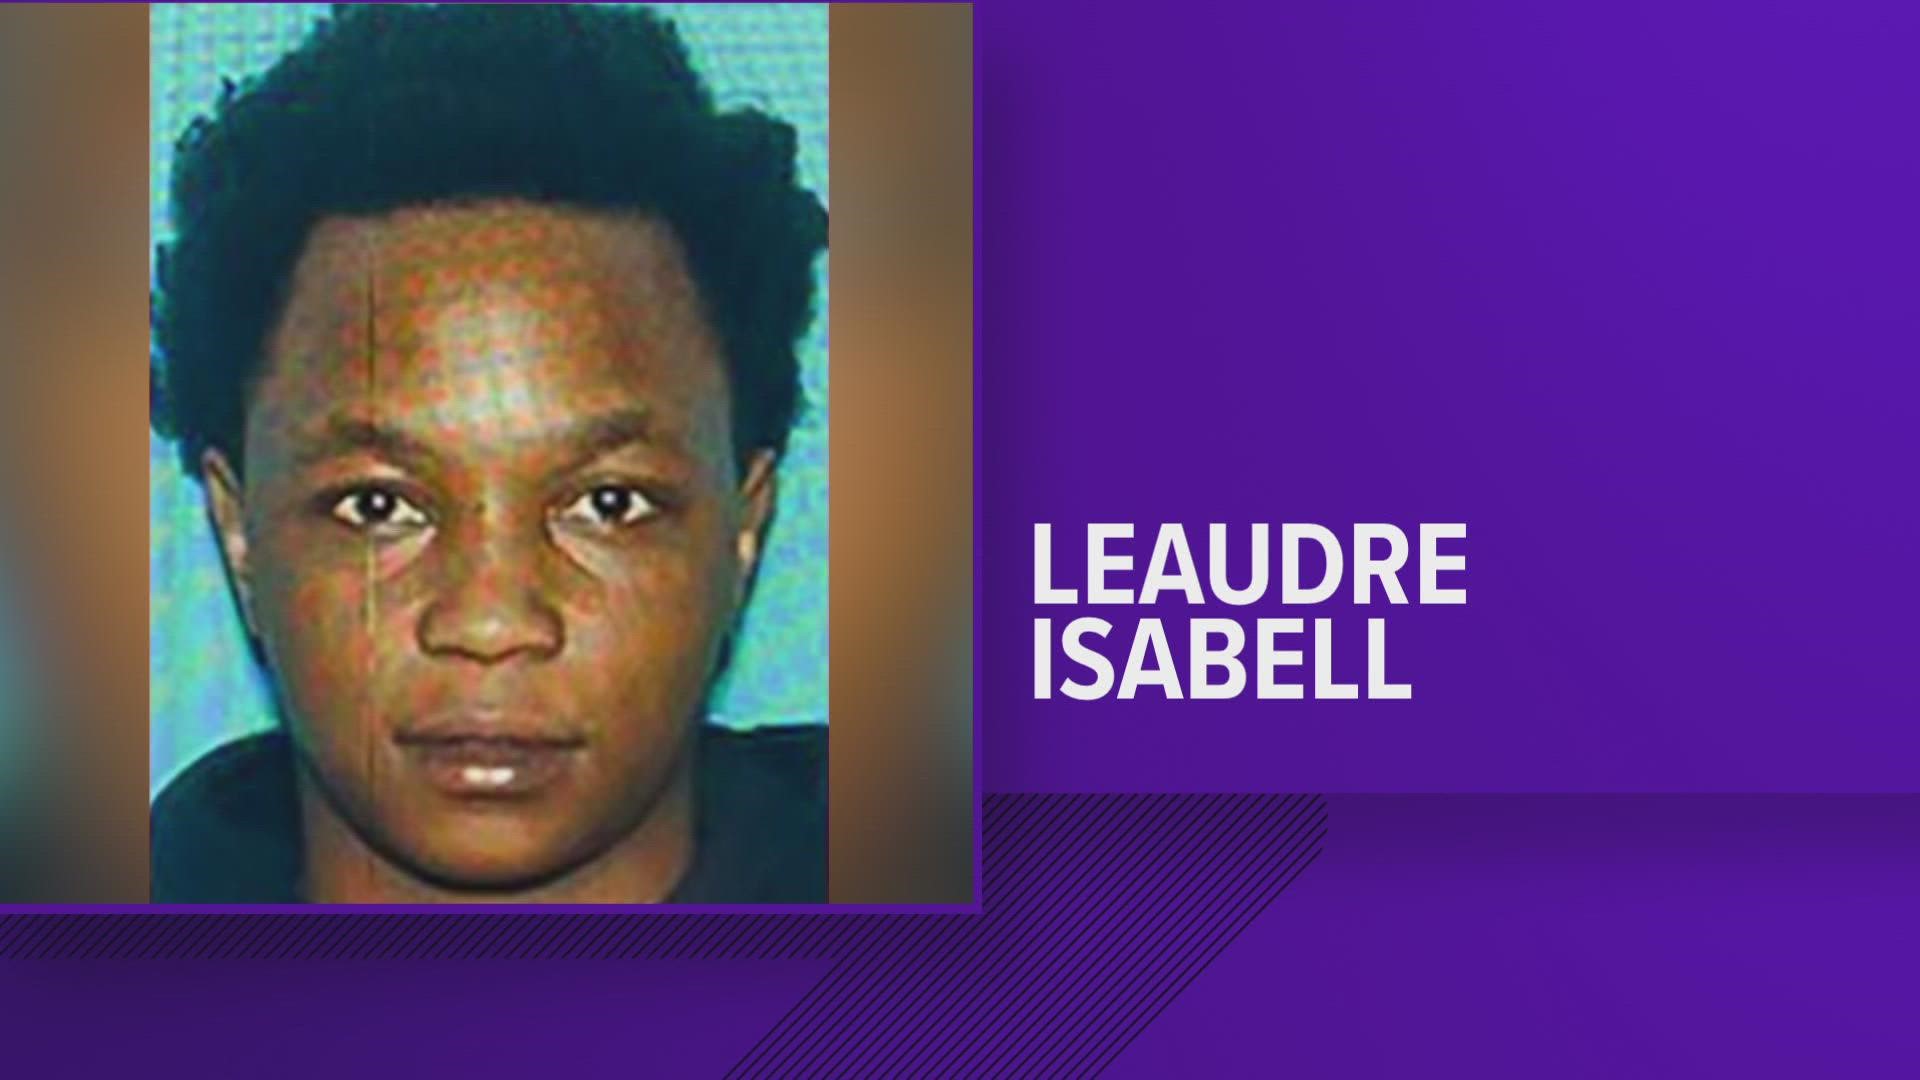 Leaudre Isabell is charged with two counts of first-degree murder and three counts of attempted murder after five people were stabbed in North Memphis Saturday.